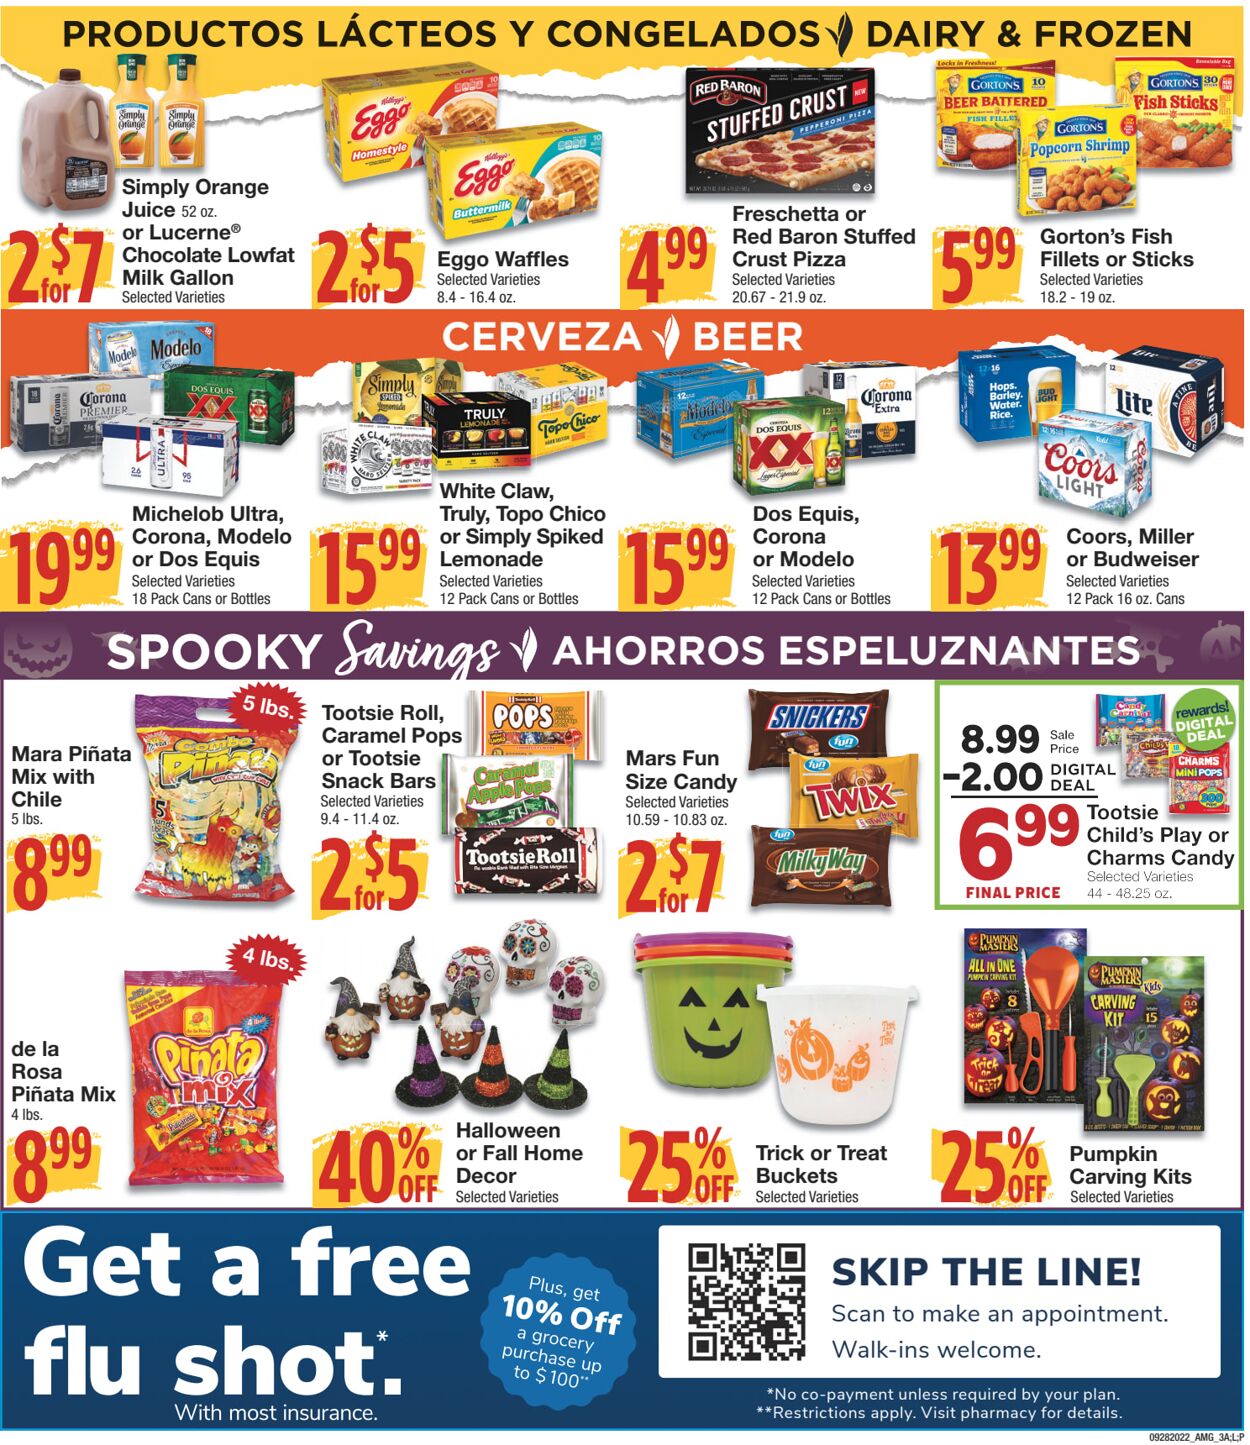 Weekly ad United Supermarkets 09/28/2022 - 10/04/2022